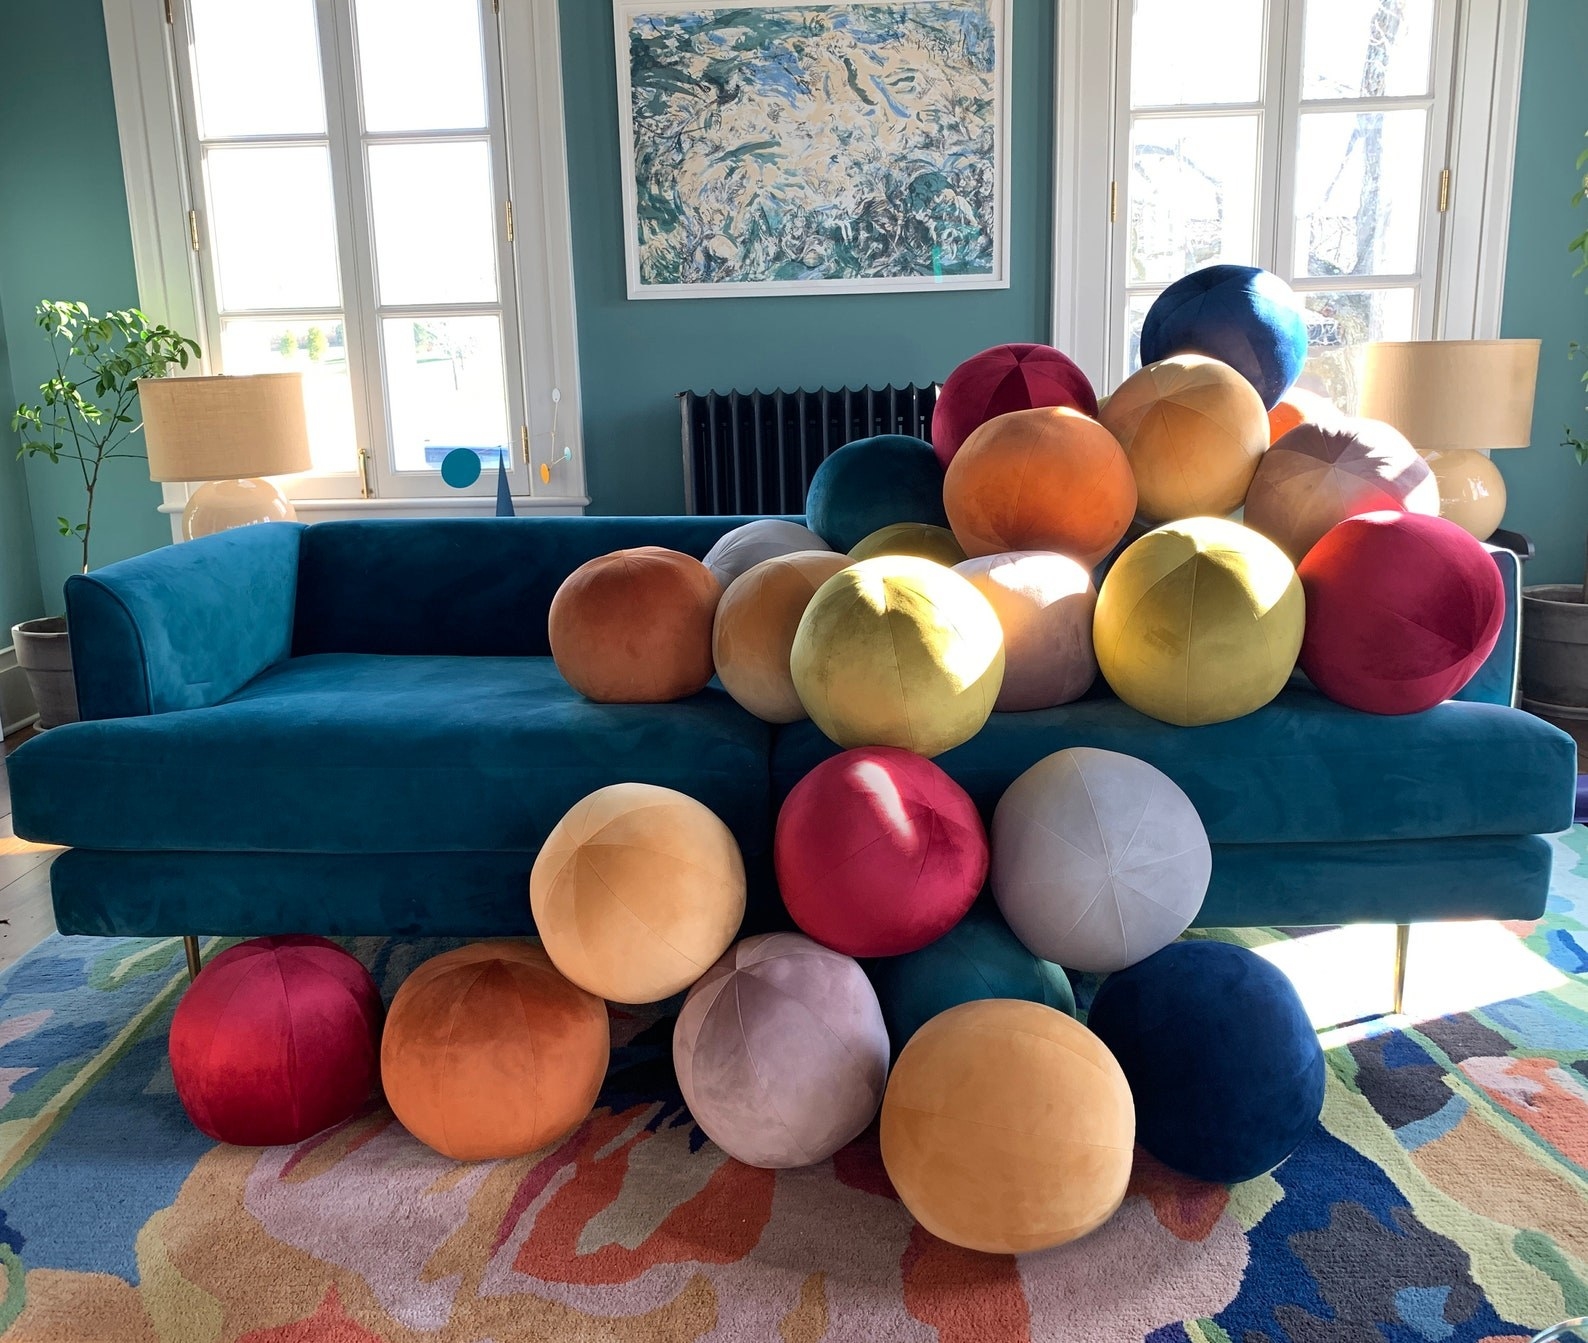 A variety of the velvet ball pillows in different colors piled onto a sofa